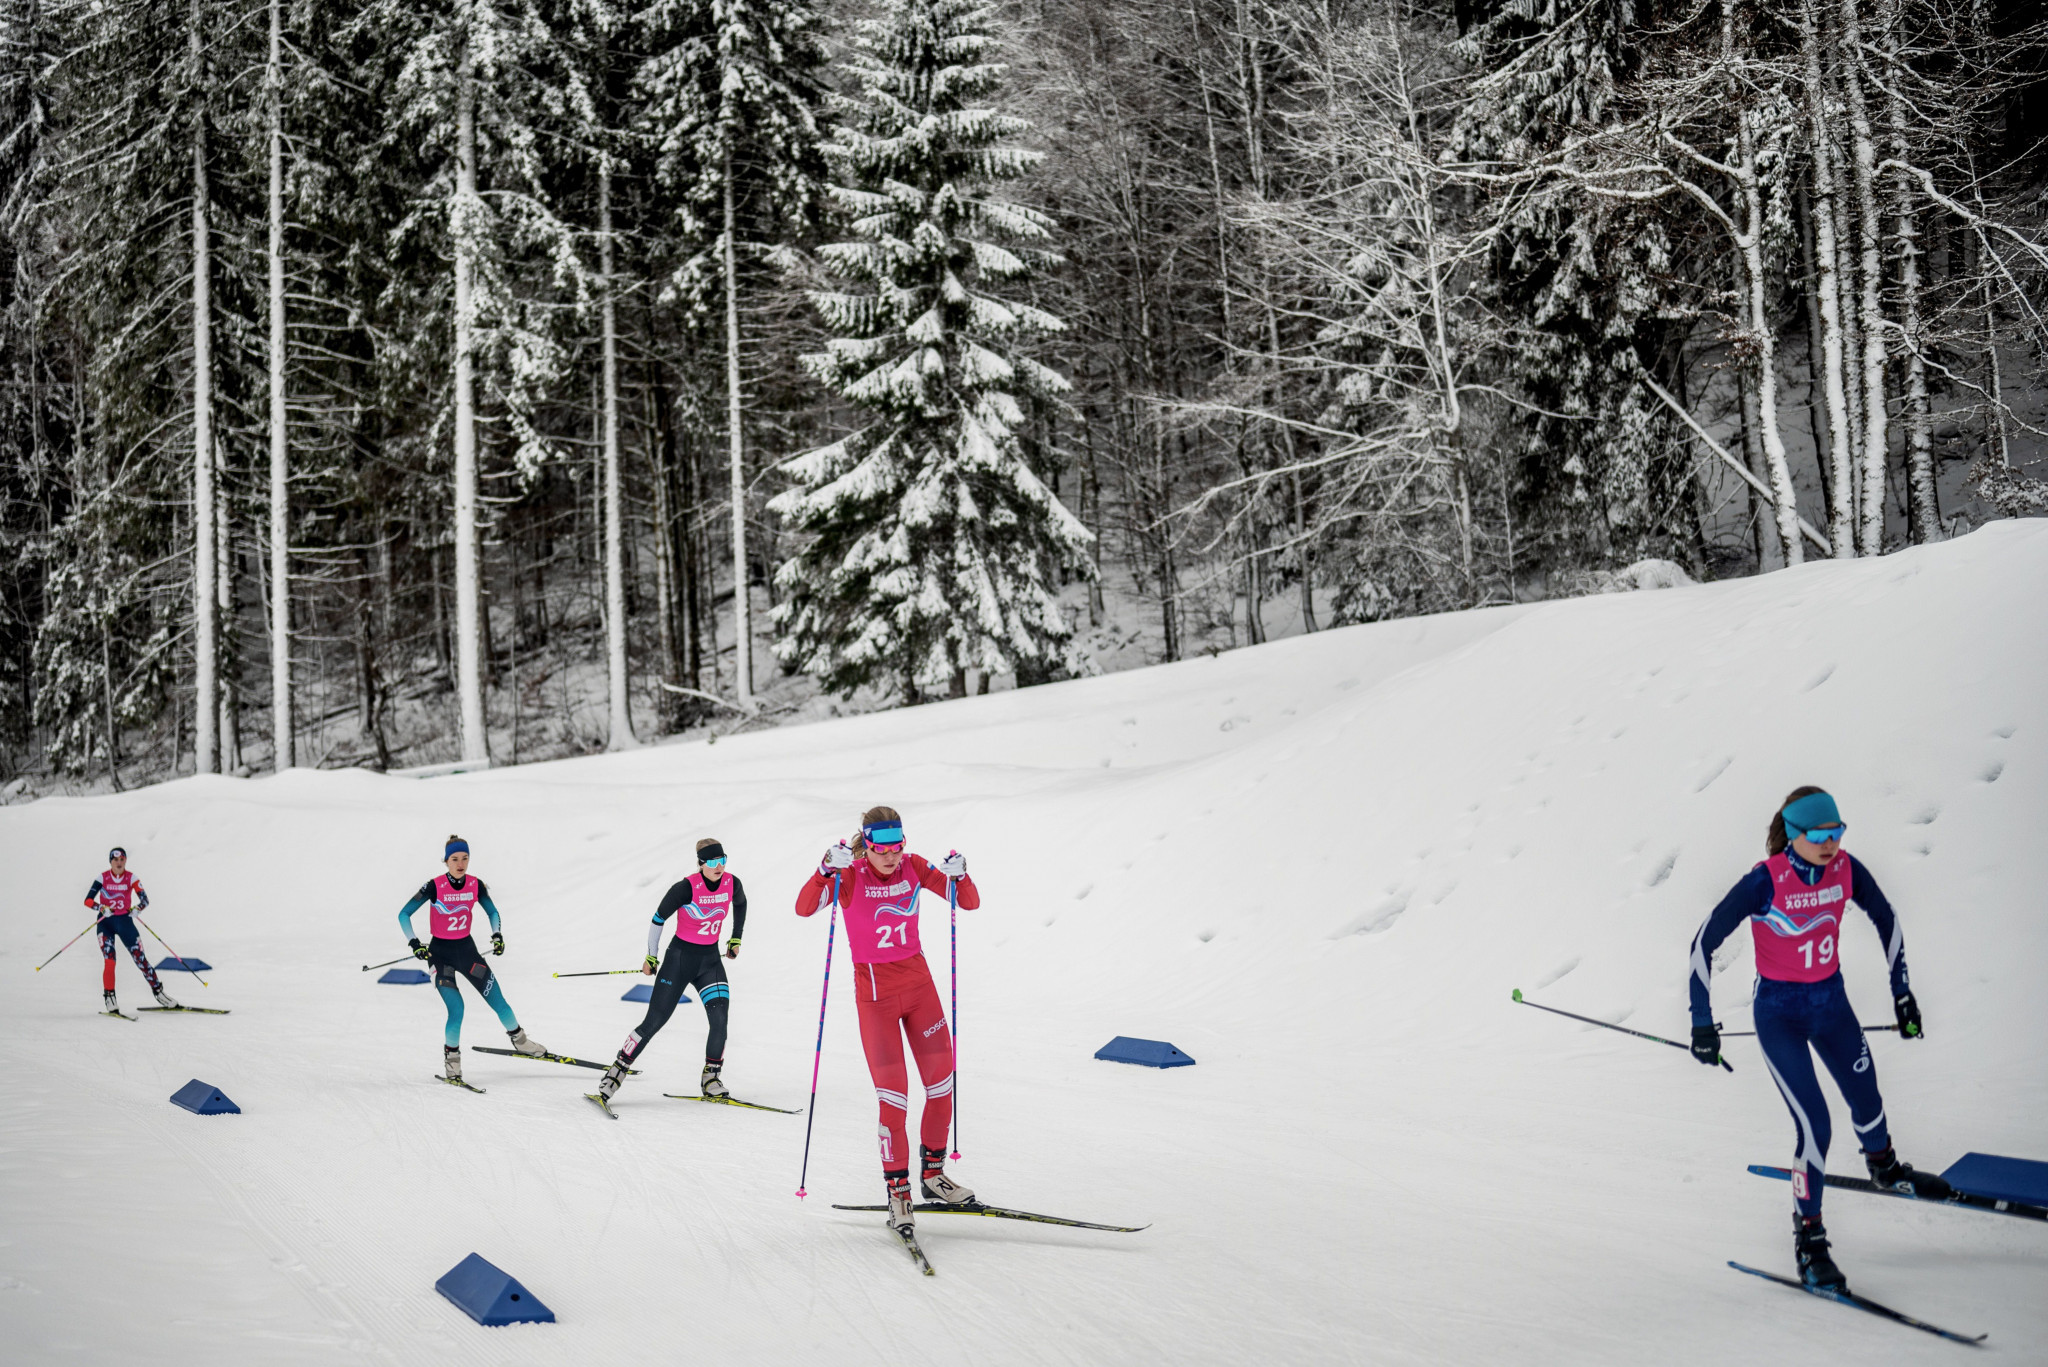 FIS Nordic Combined Committee finalise rules for inaugural women's World Cup season